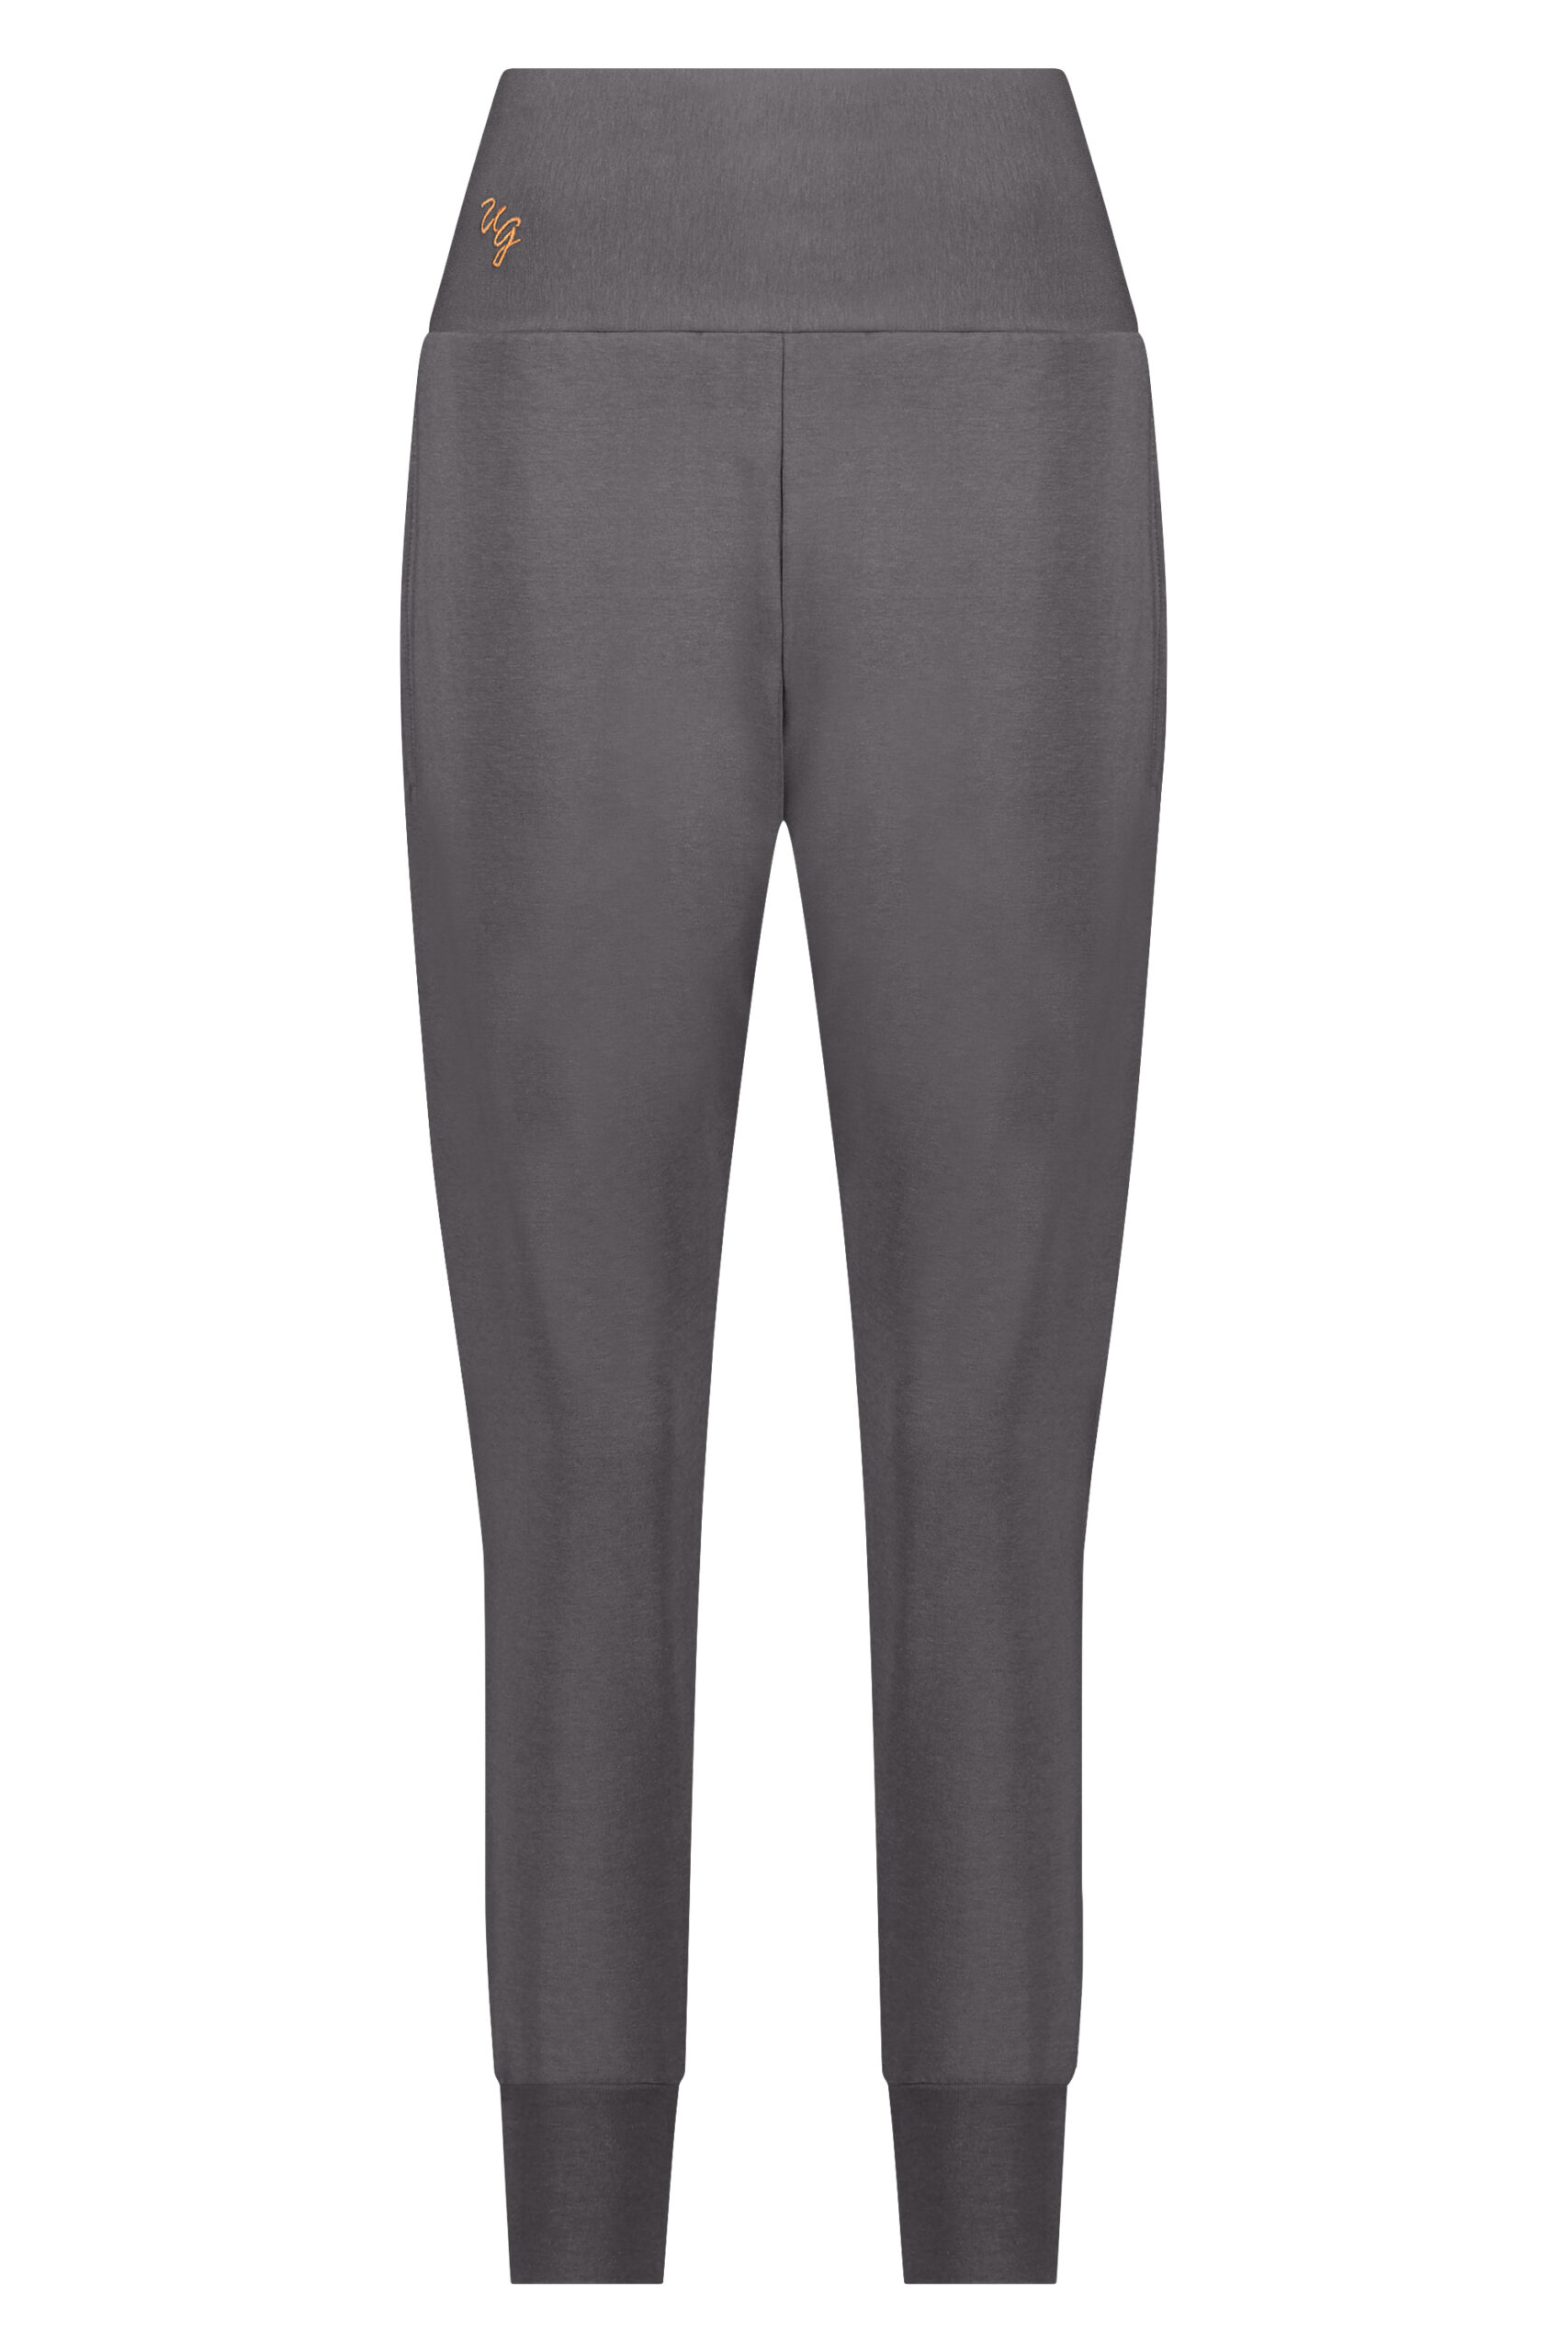 bhumi loose fit yoga pants-charcoal_front